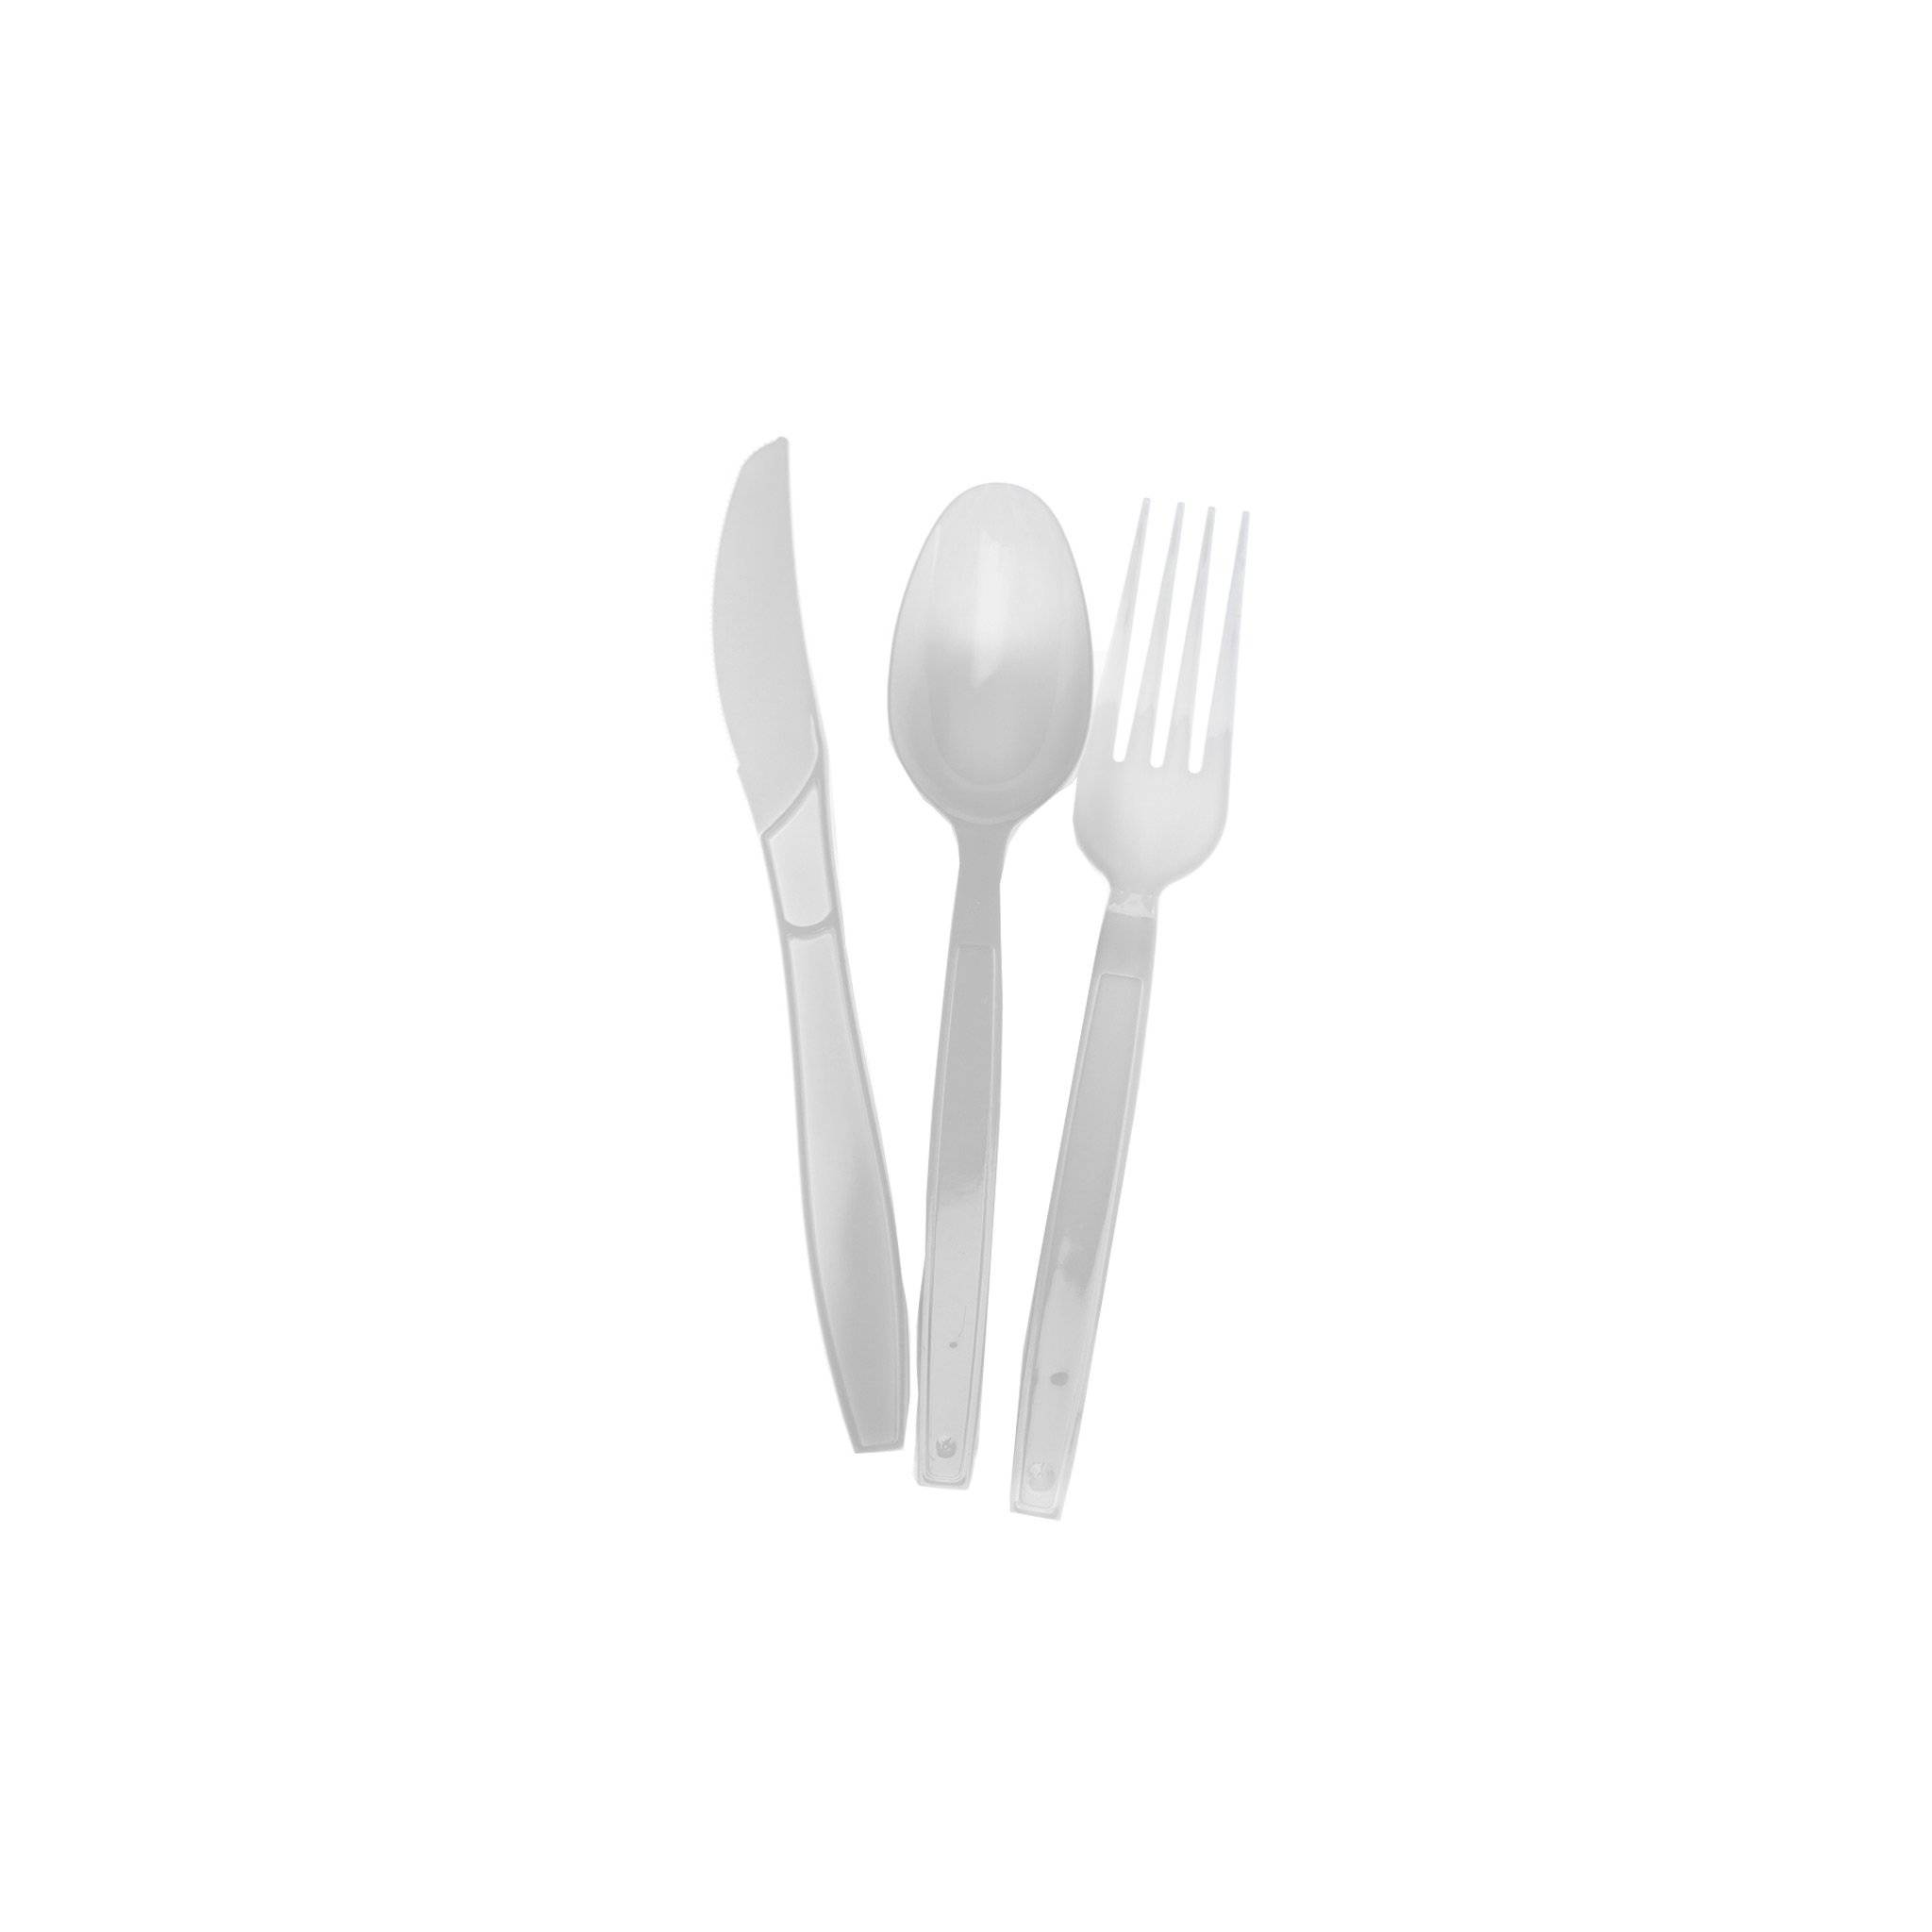 Hotpack | Heavy Duty White Cutlery Set (Spoon/Fork/Knife/Napkin) | 250 Pieces - Hotpack Global